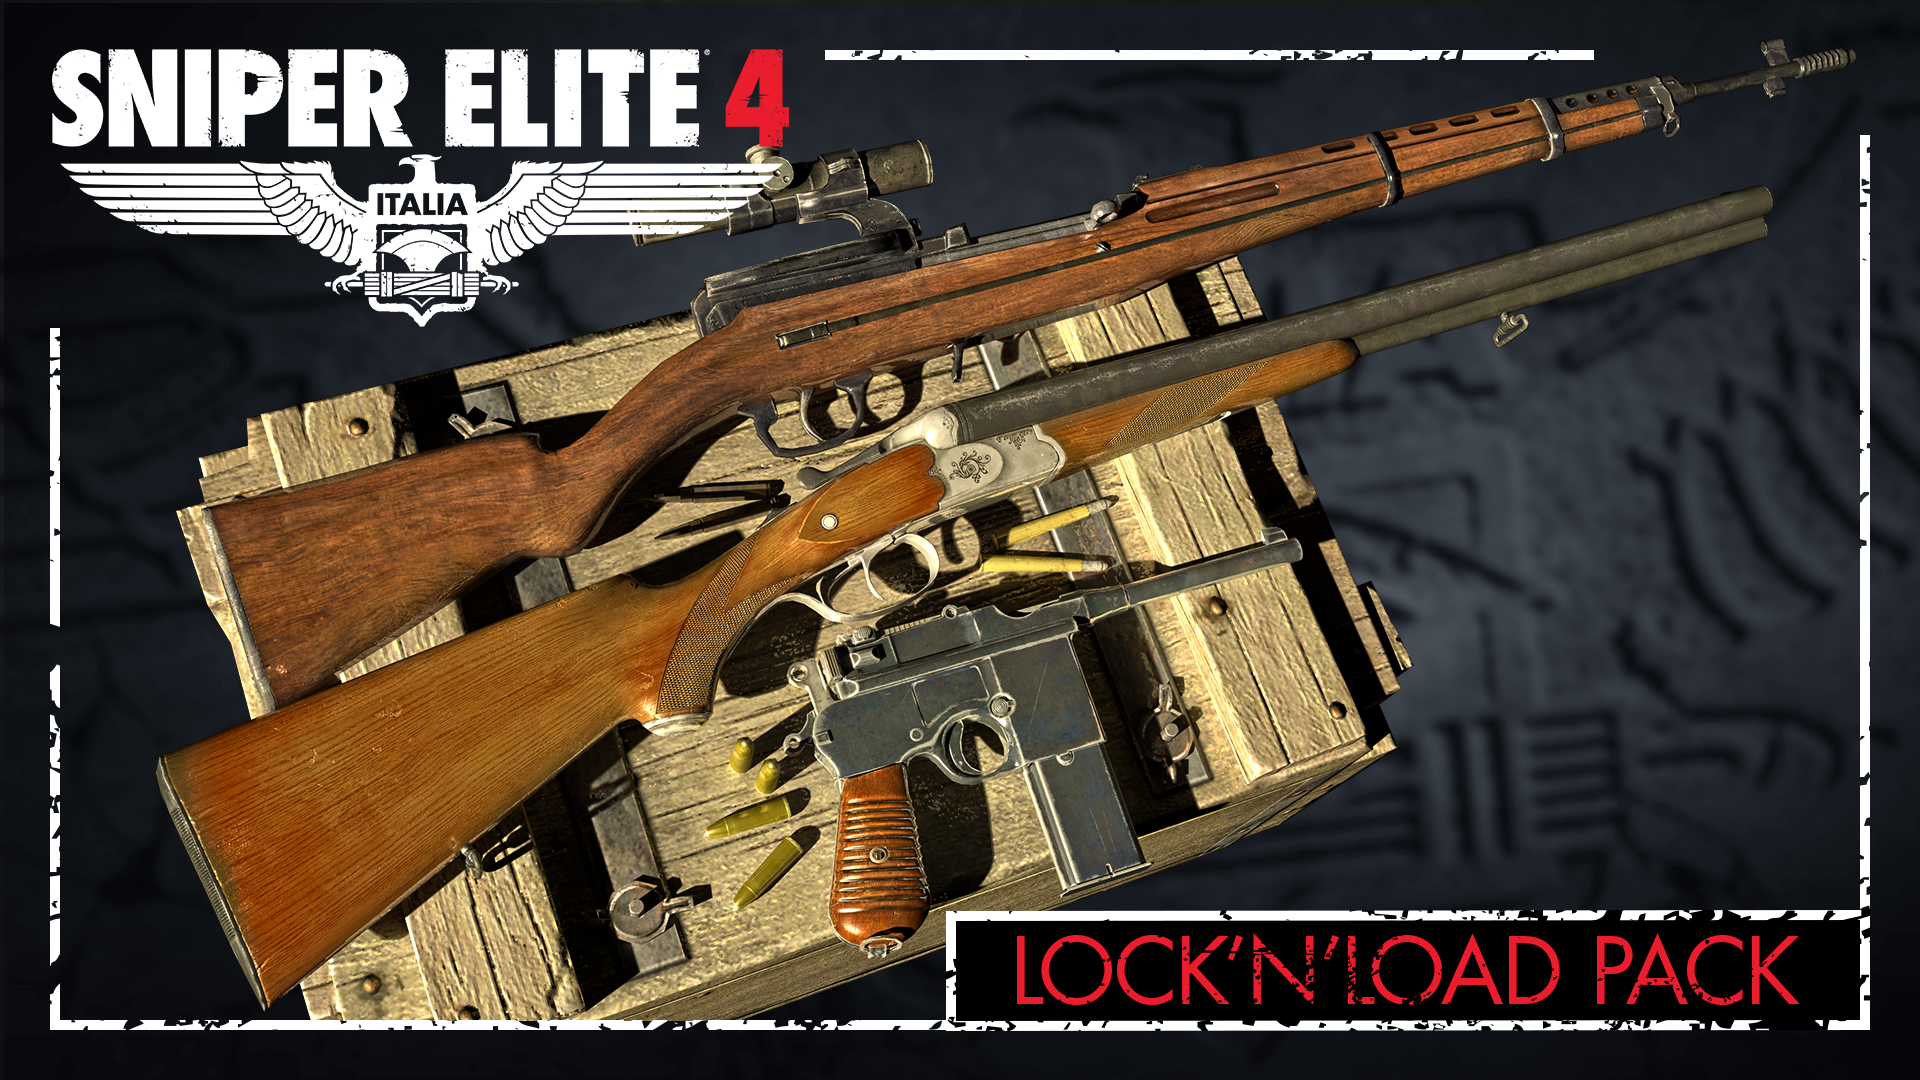 Sniper Elite 4 - Lock and Load Weapons Pack DLC Steam CD Key, 4.51$